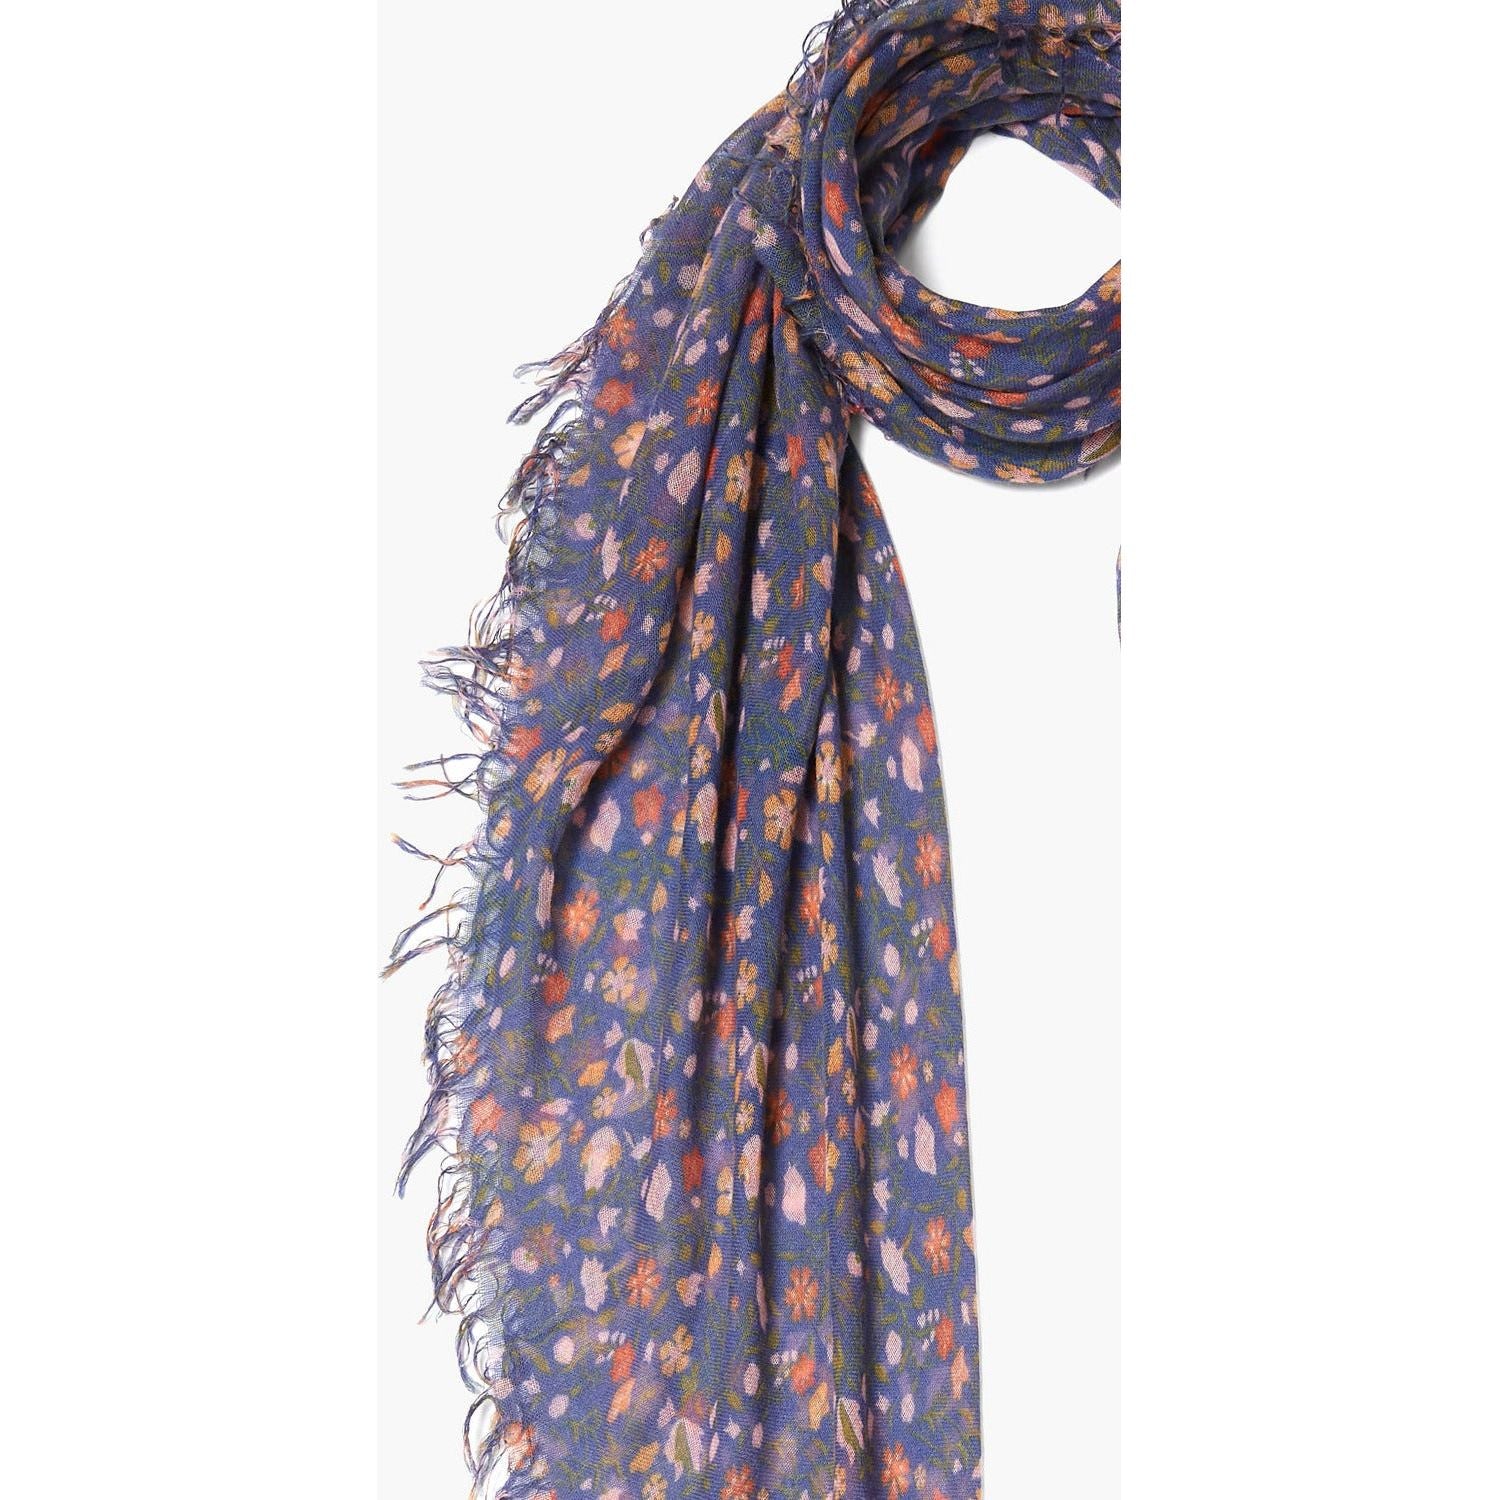 Art meets fashion in Hermès FW'21 collection of silk scarves